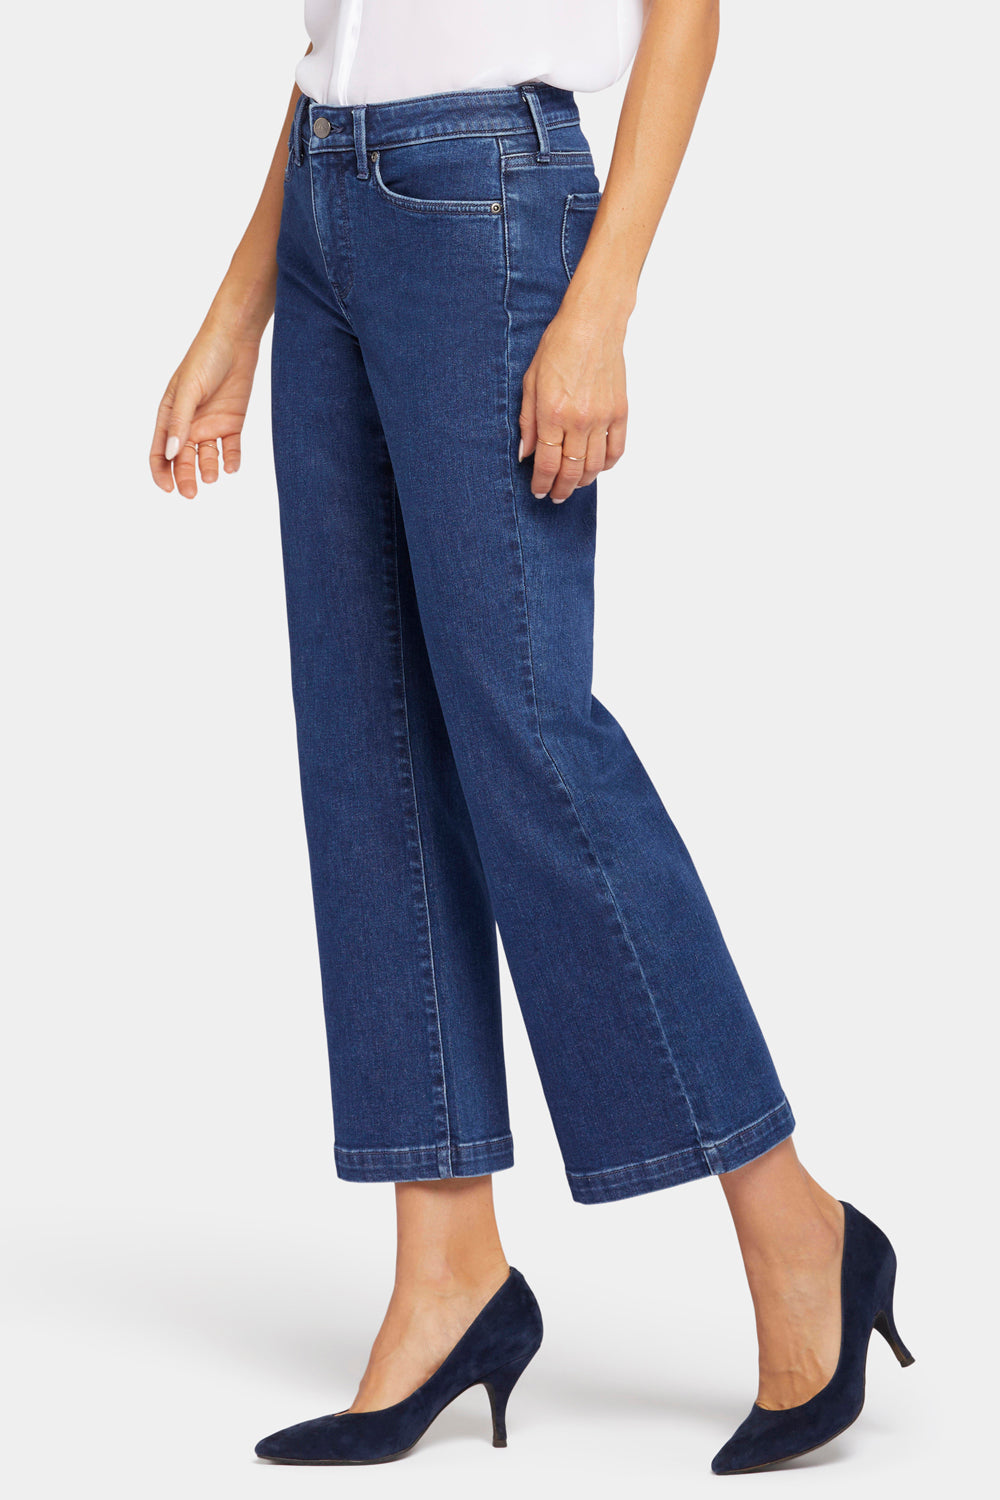 NYDJ Relaxed Flared Jeans  - Treasured